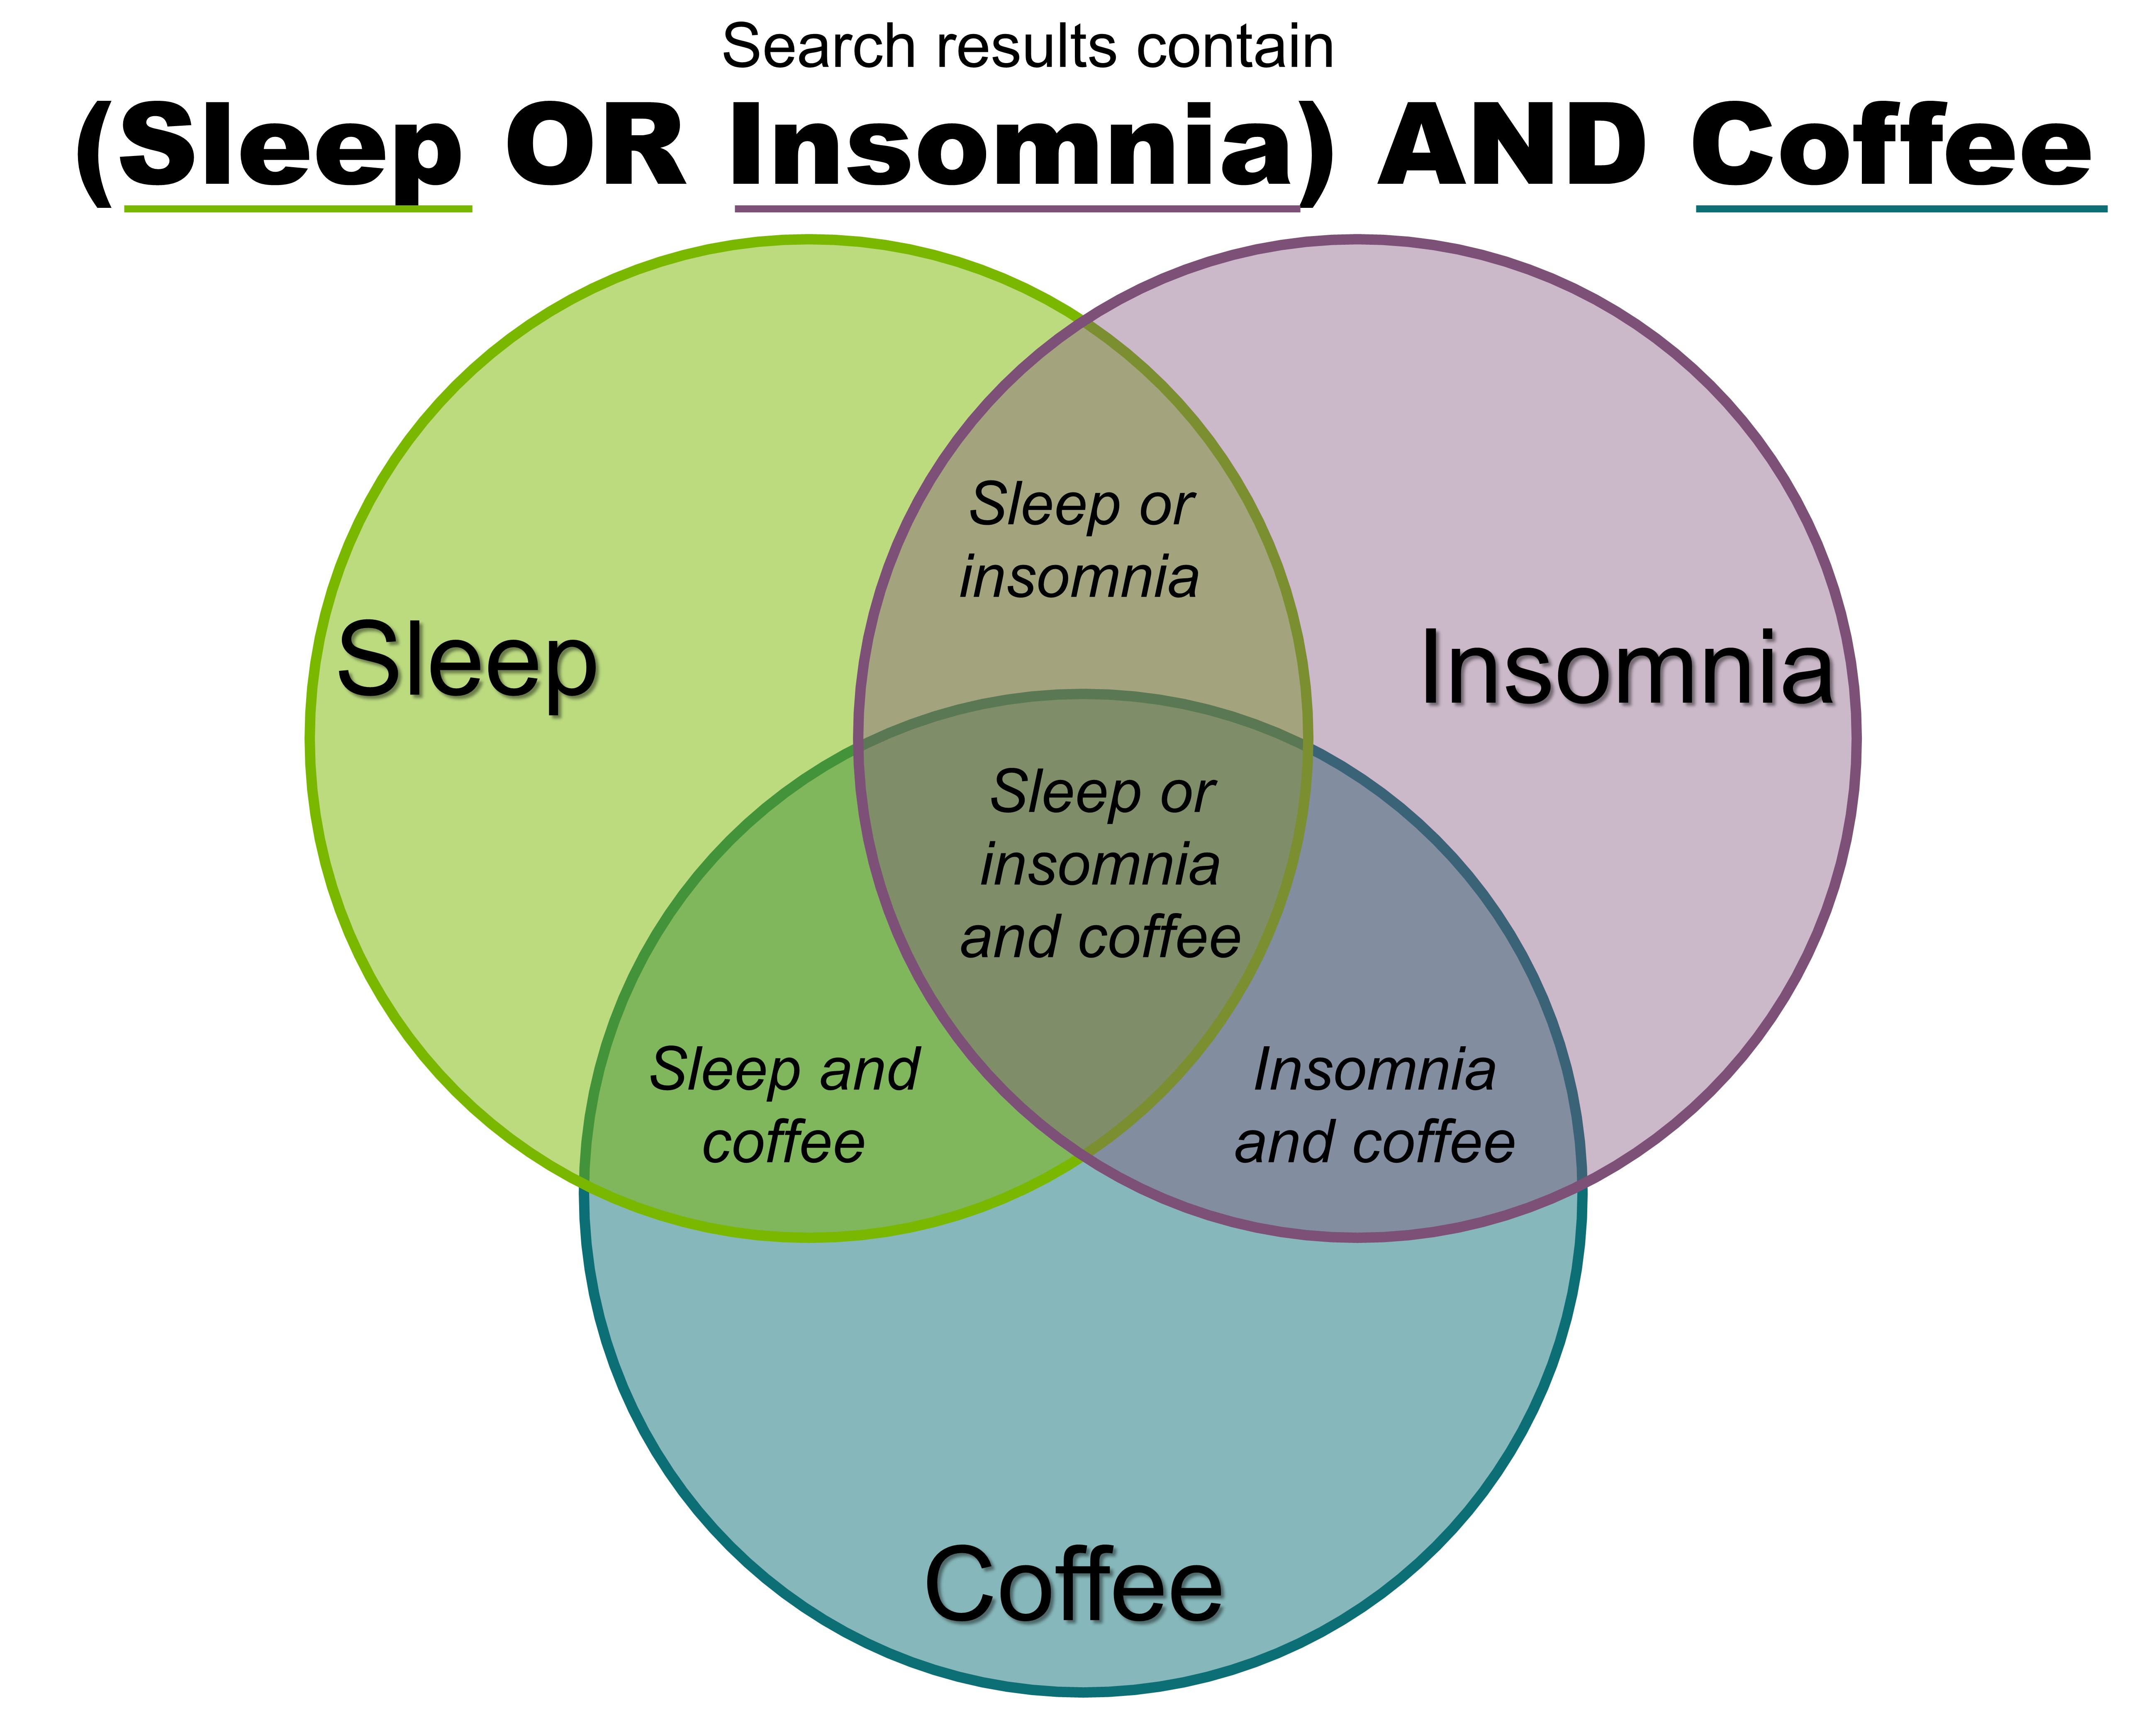 Figure 7.4.3 Using the search strategies for "AND" and "OR", will return results containing "sleep" and "coffee" as well as results containing "insomnia" and "coffee". 